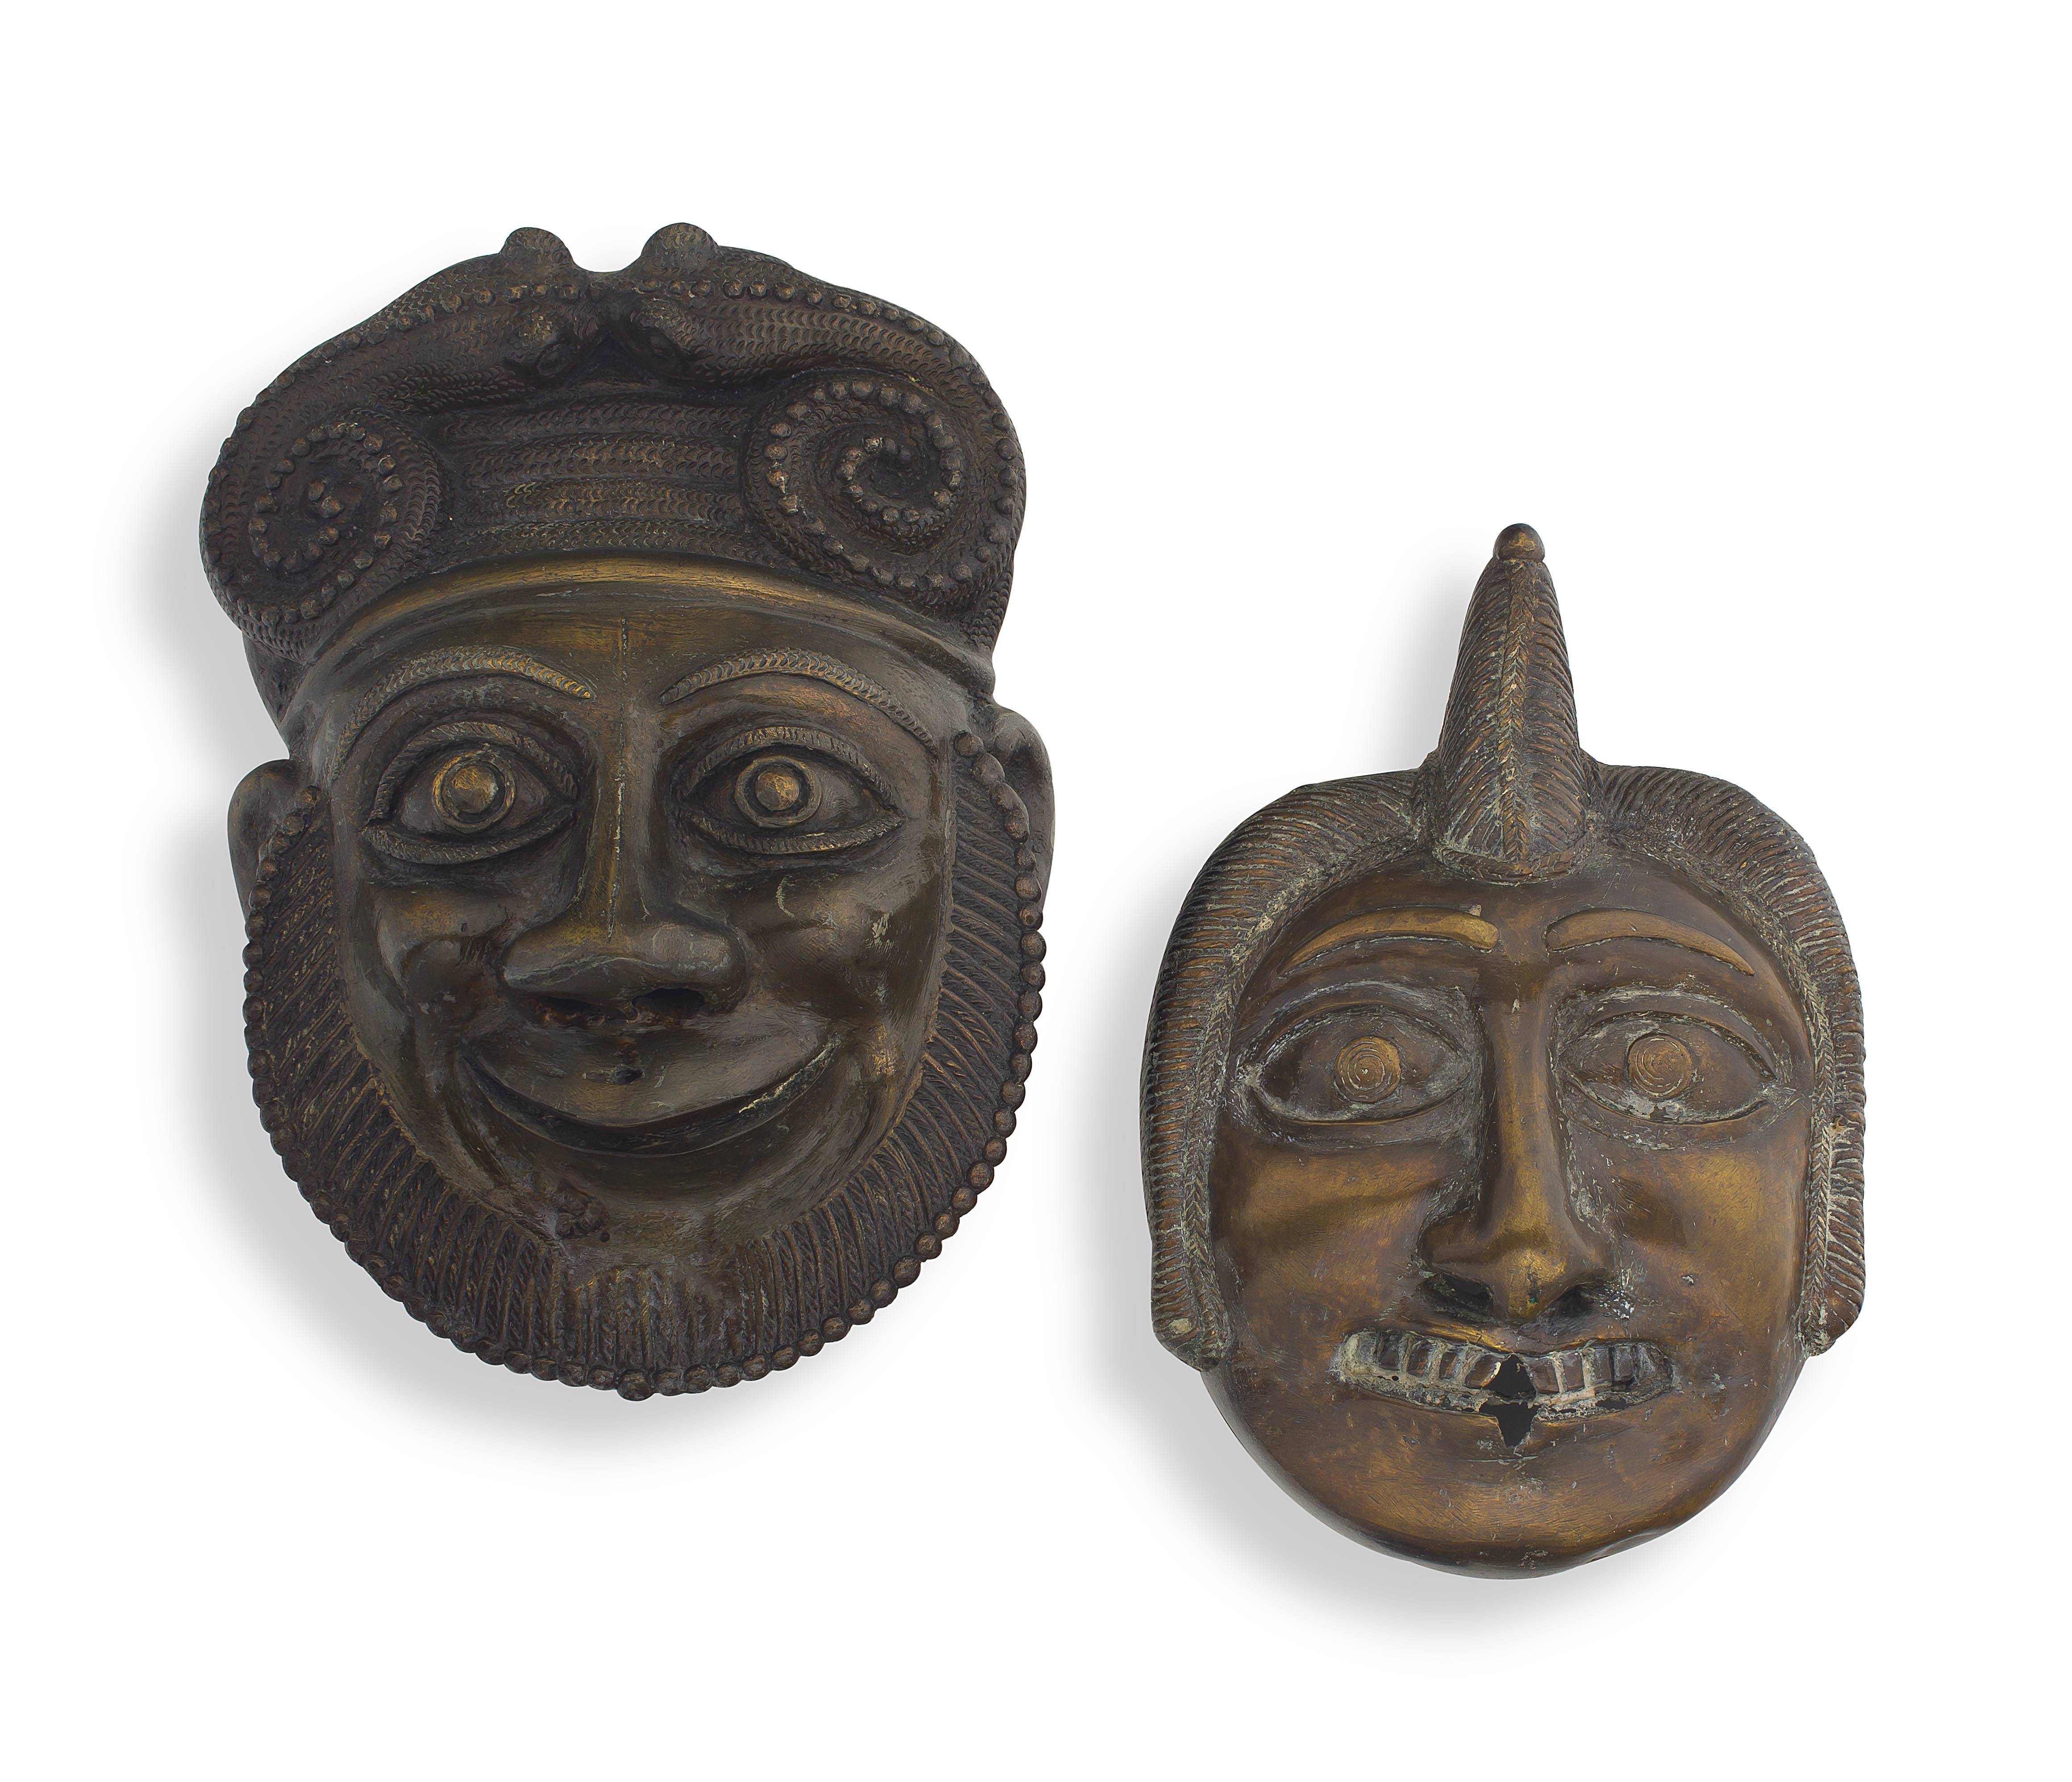 A bronze mask, 19th century, possibly Indian